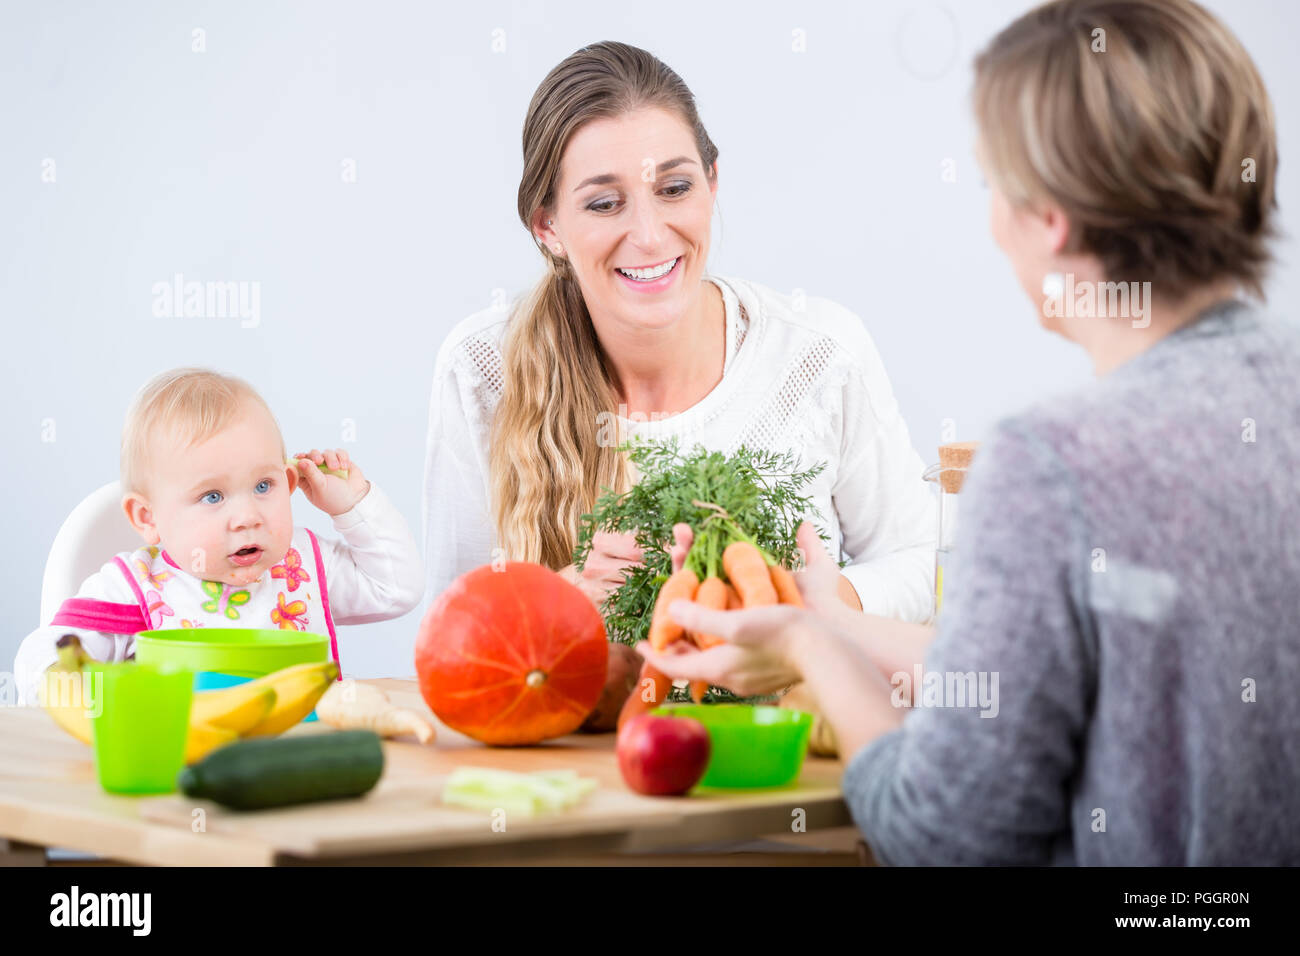 Portrait of a cheerful mother learning from her best friend Stock Photo